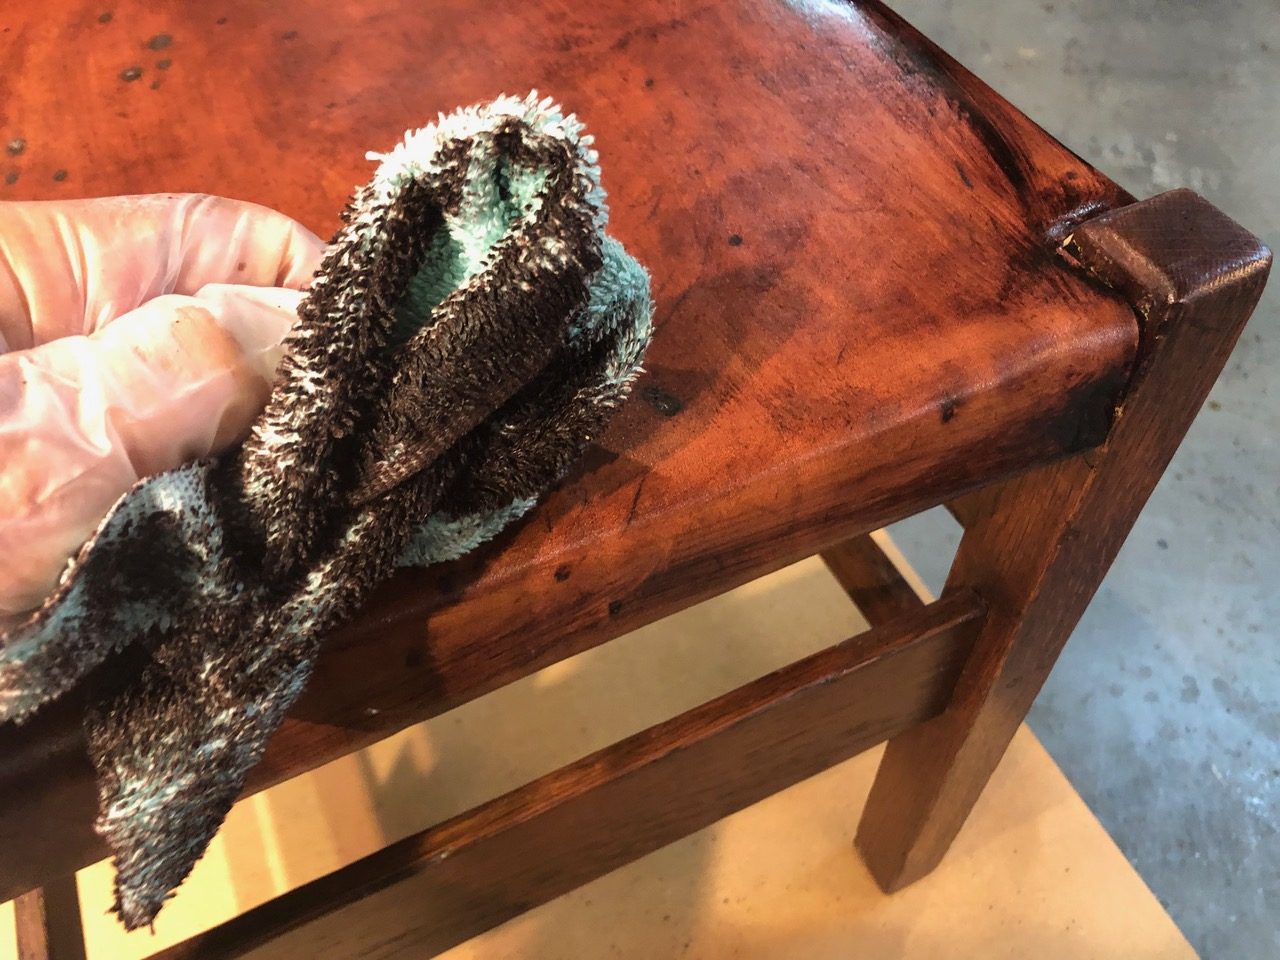 What happens when one uses wood stain to dye leather craftsworks? - Quora